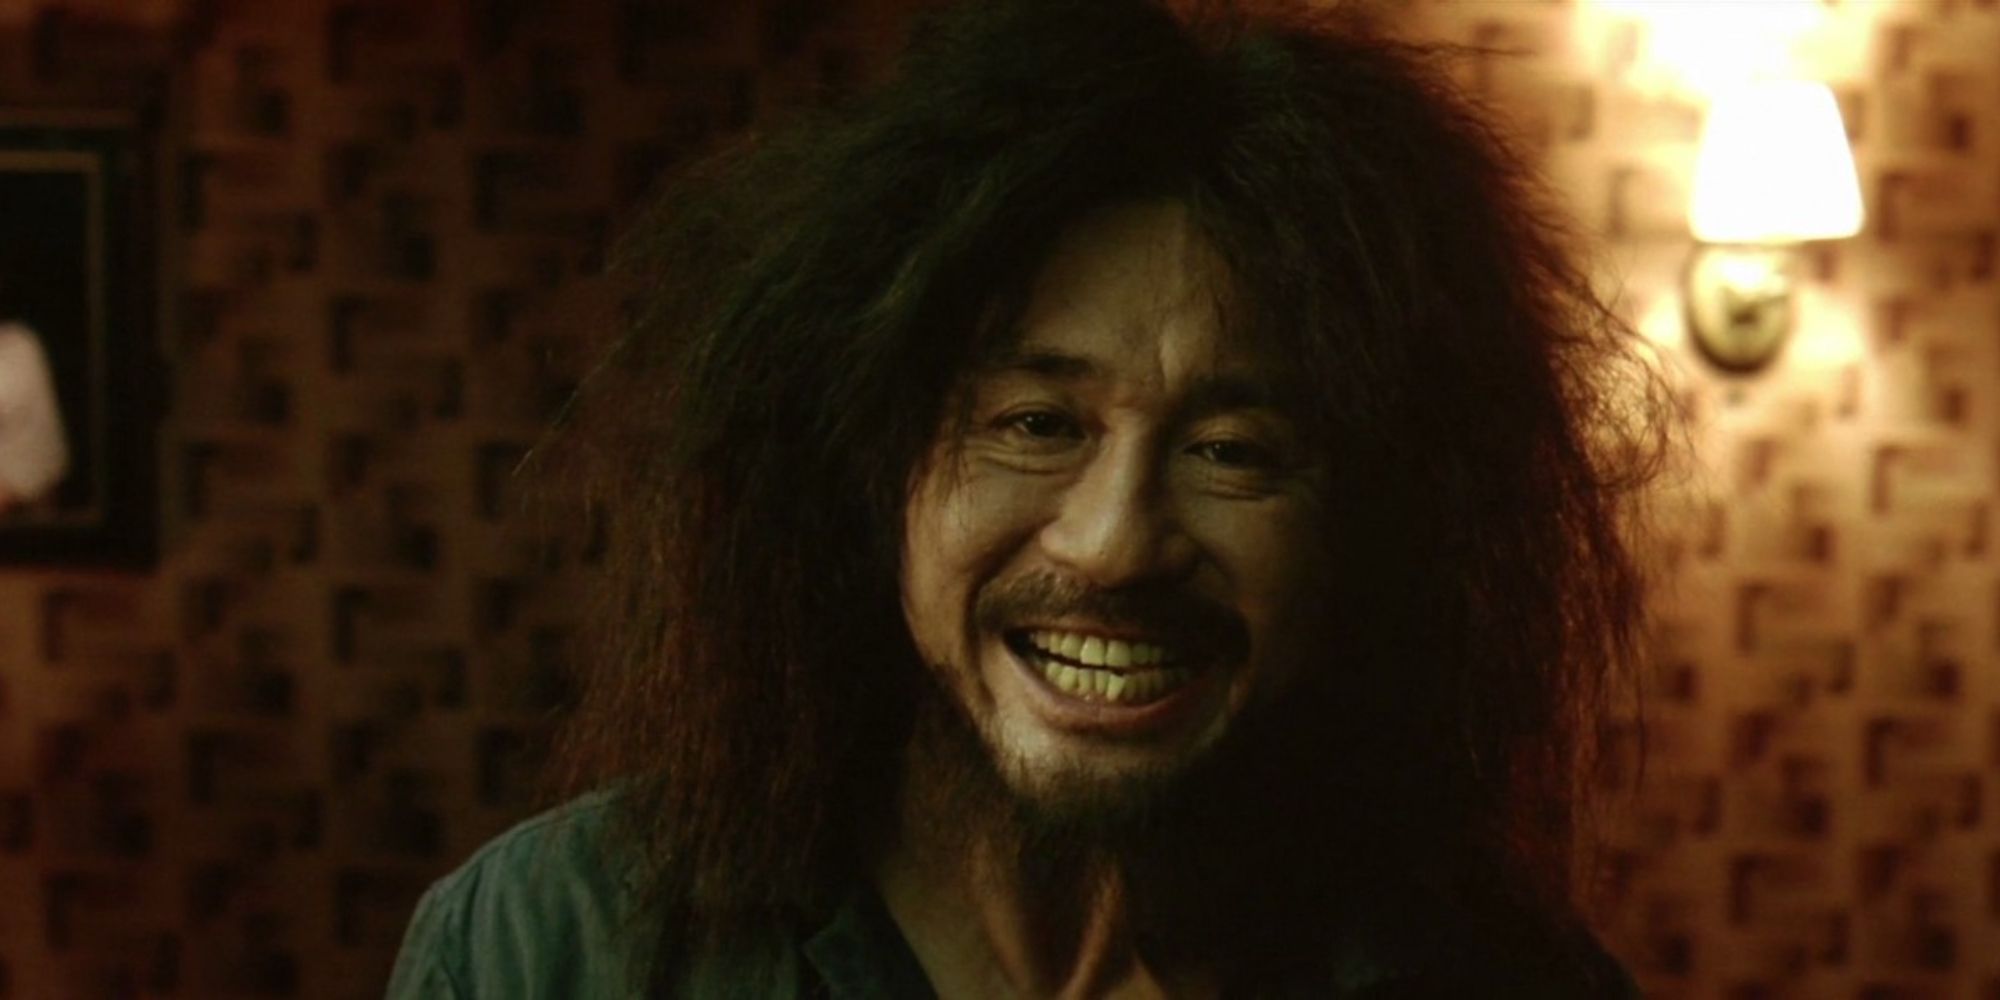 Oldboy is one of the best revenge films of all time